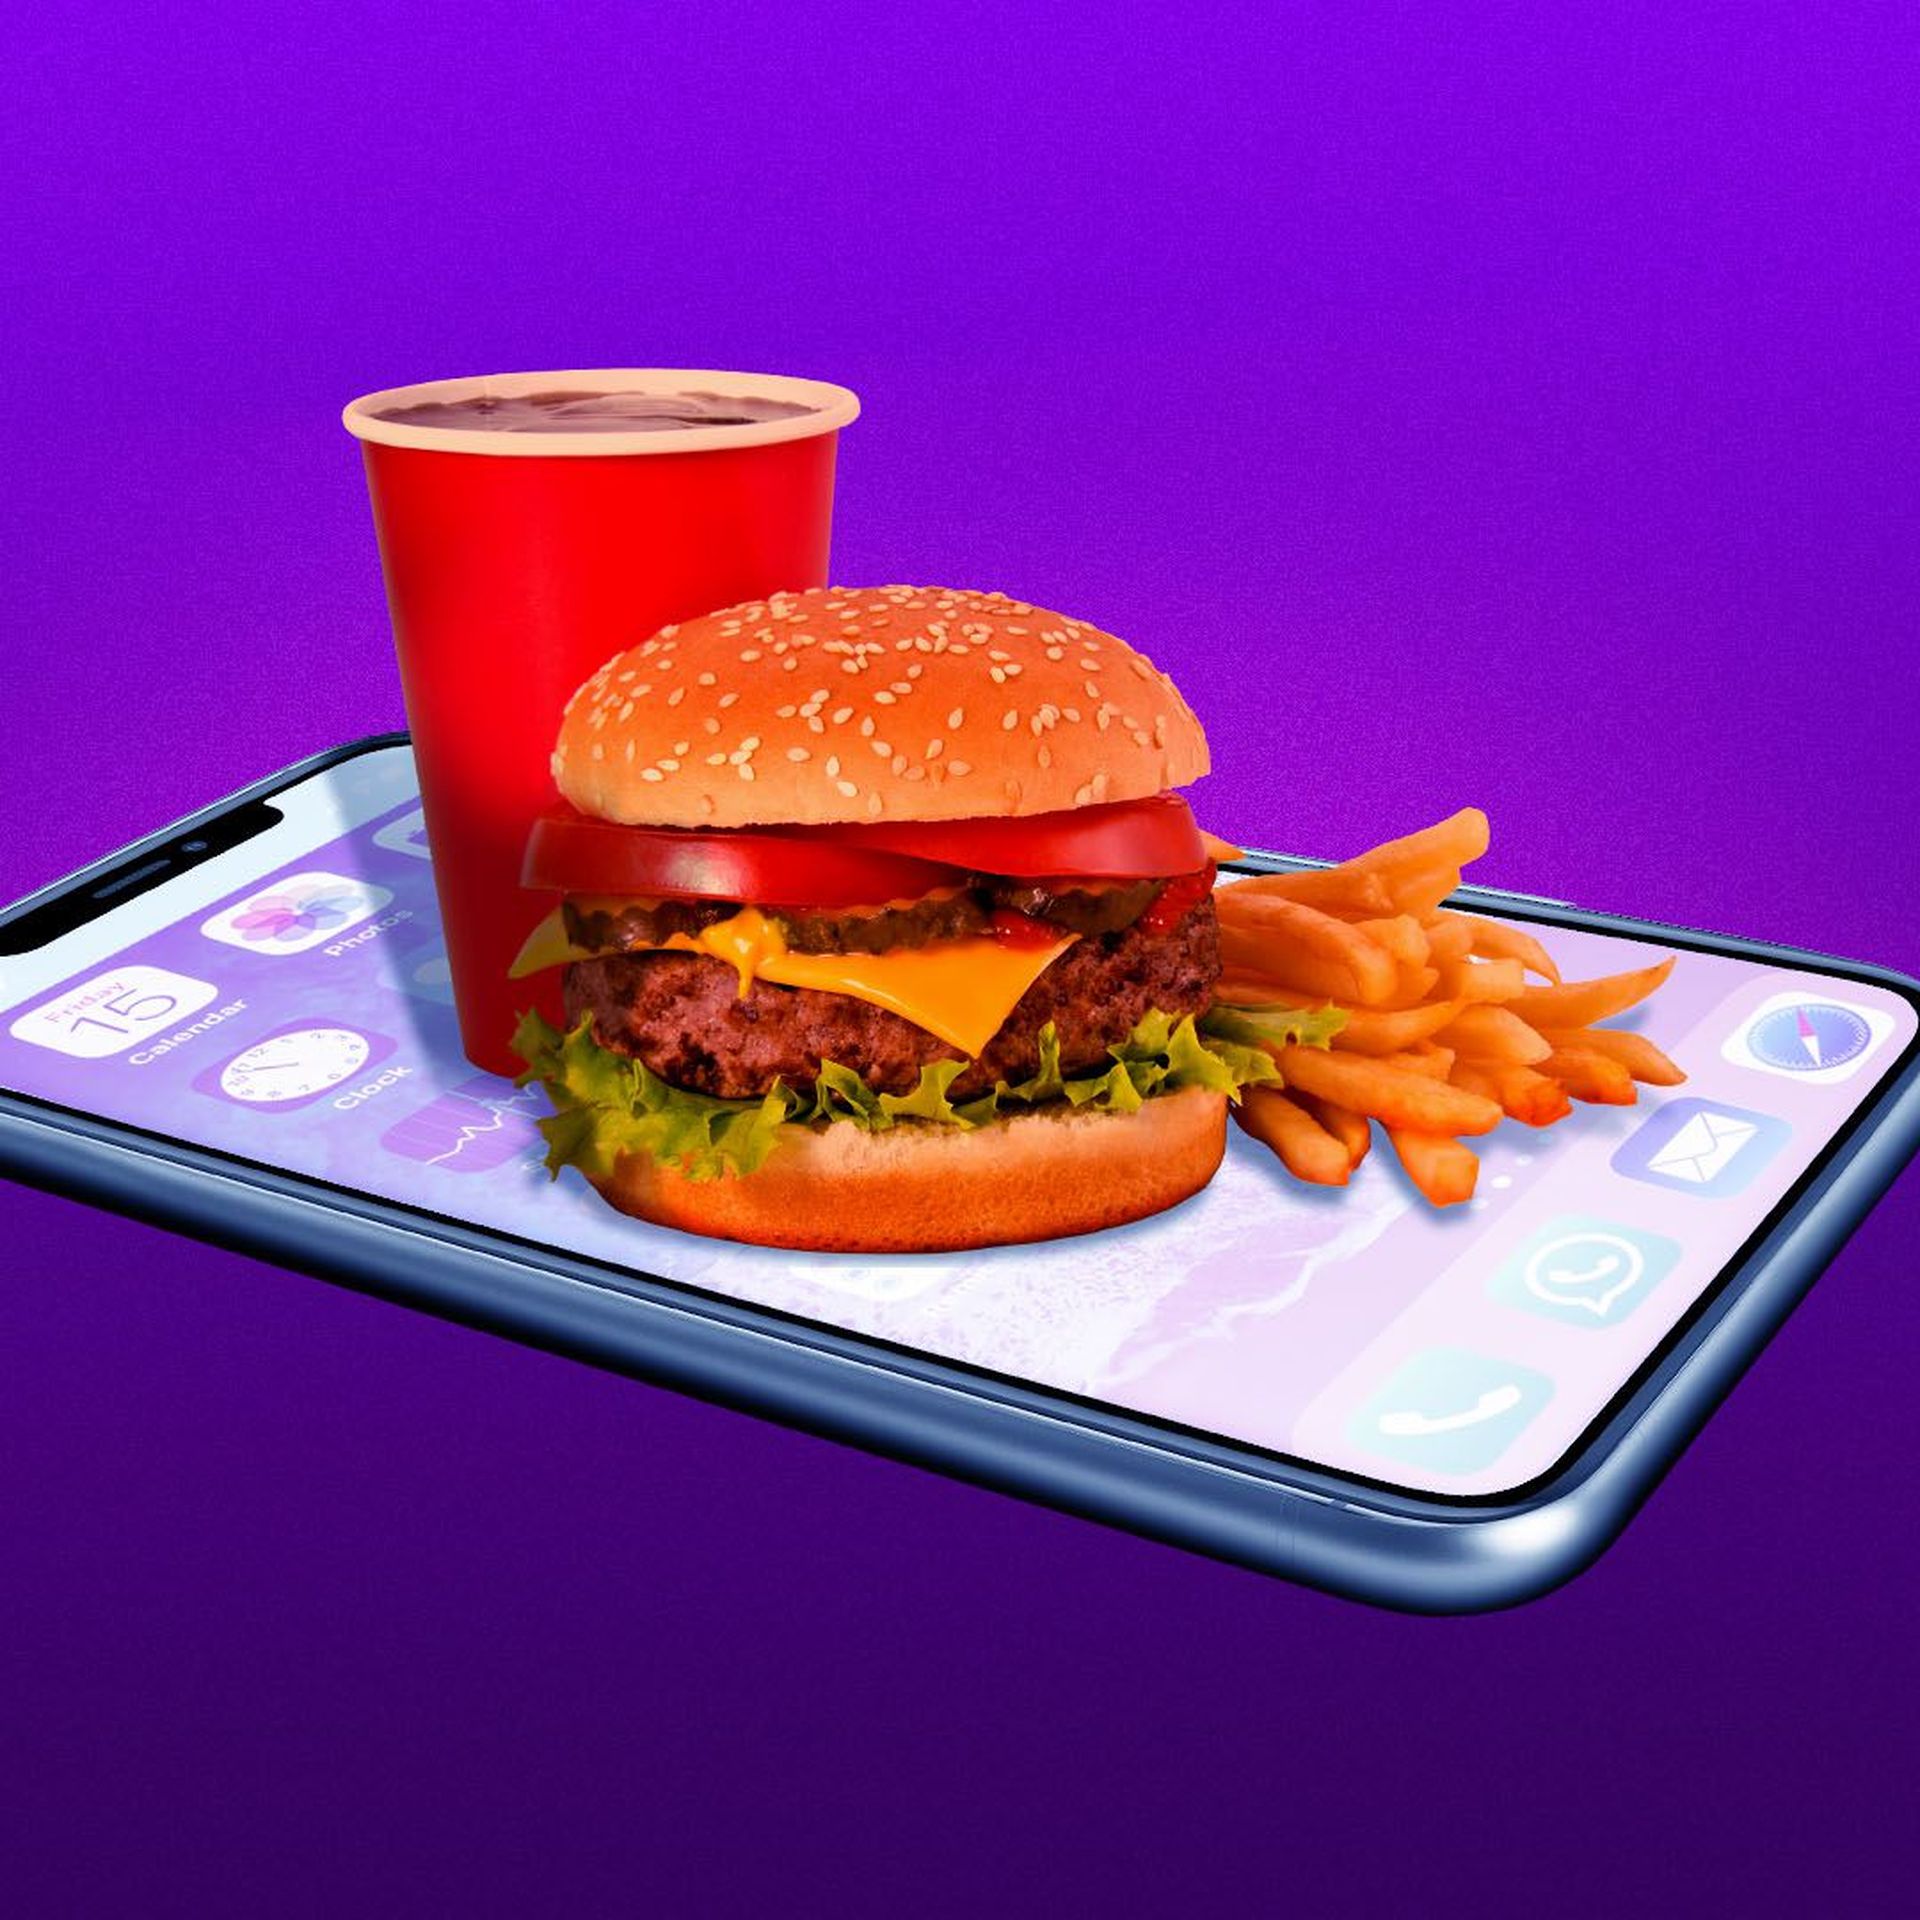 Illustration of a burger, drink, and fries, sitting on a cell phone as if it were a tray